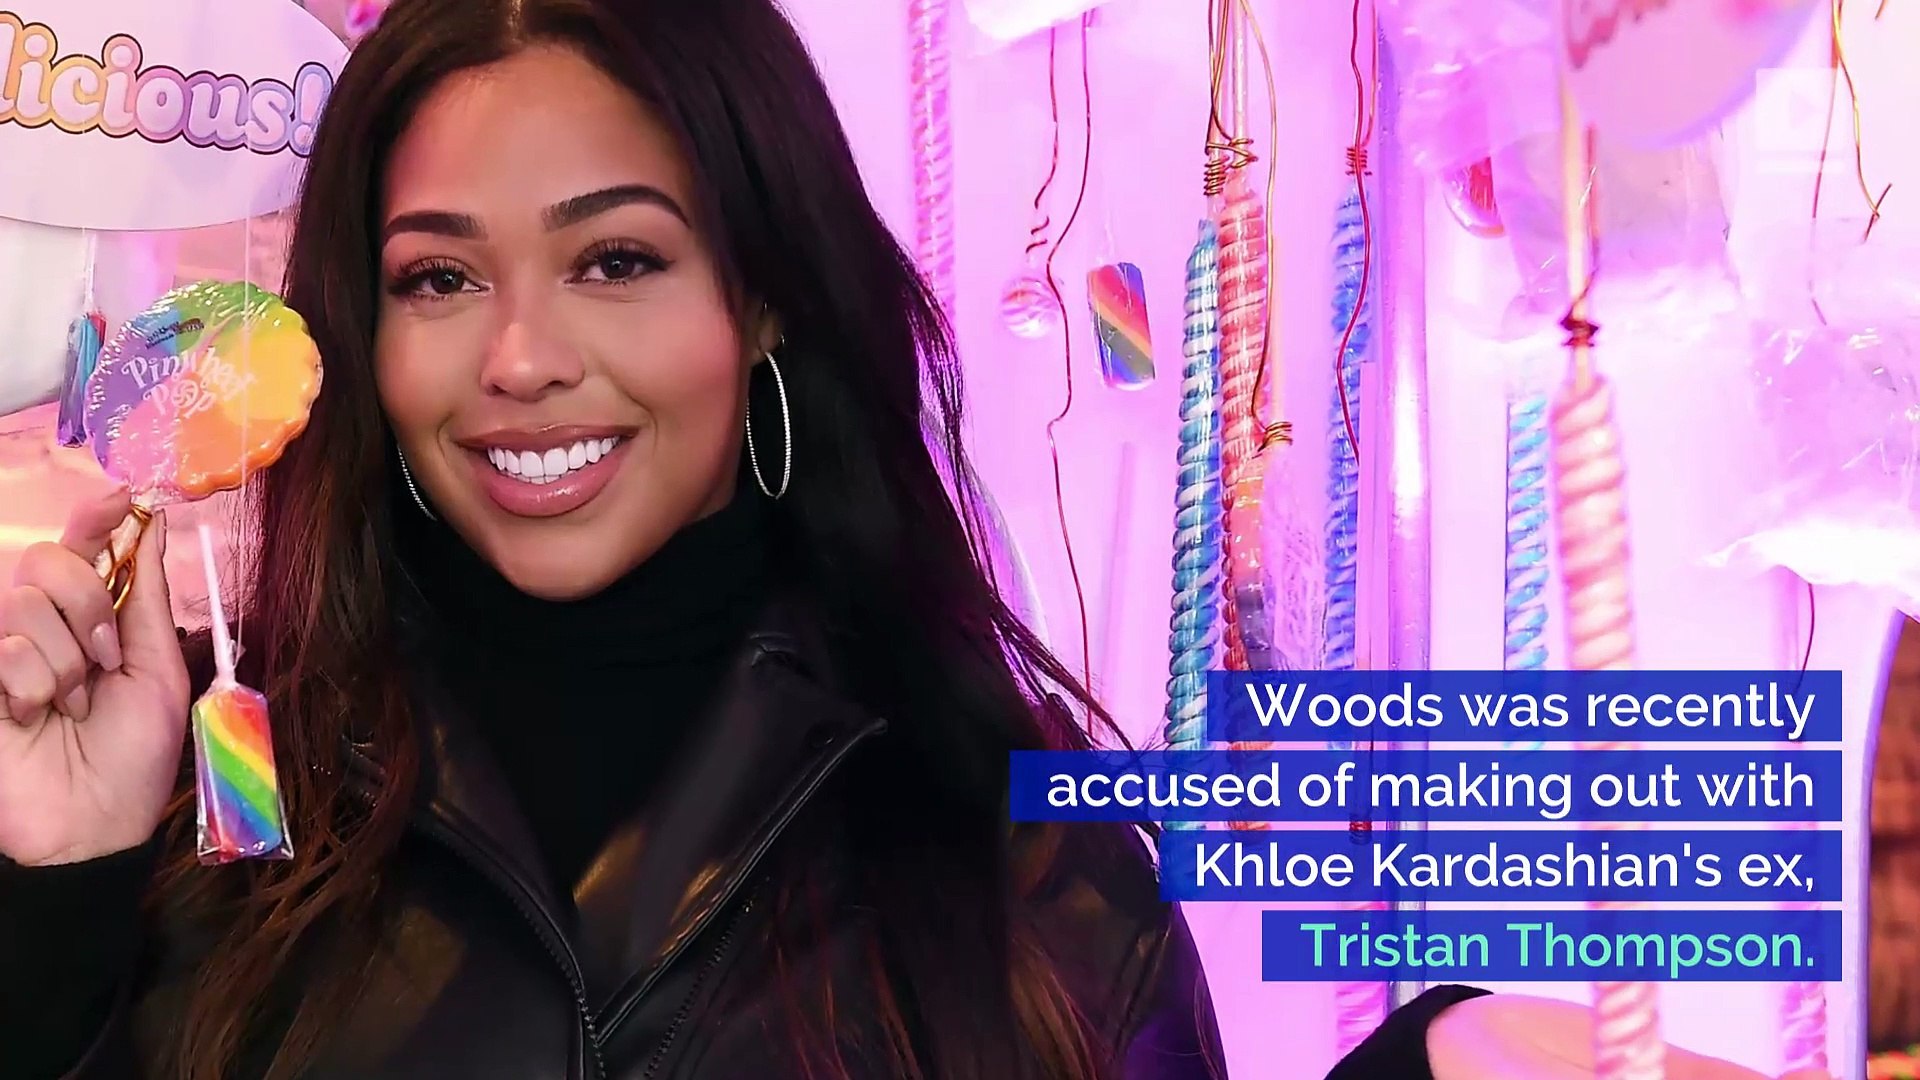 Jordyn Woods Denies Cheating With Tristan Thompson On Red Table